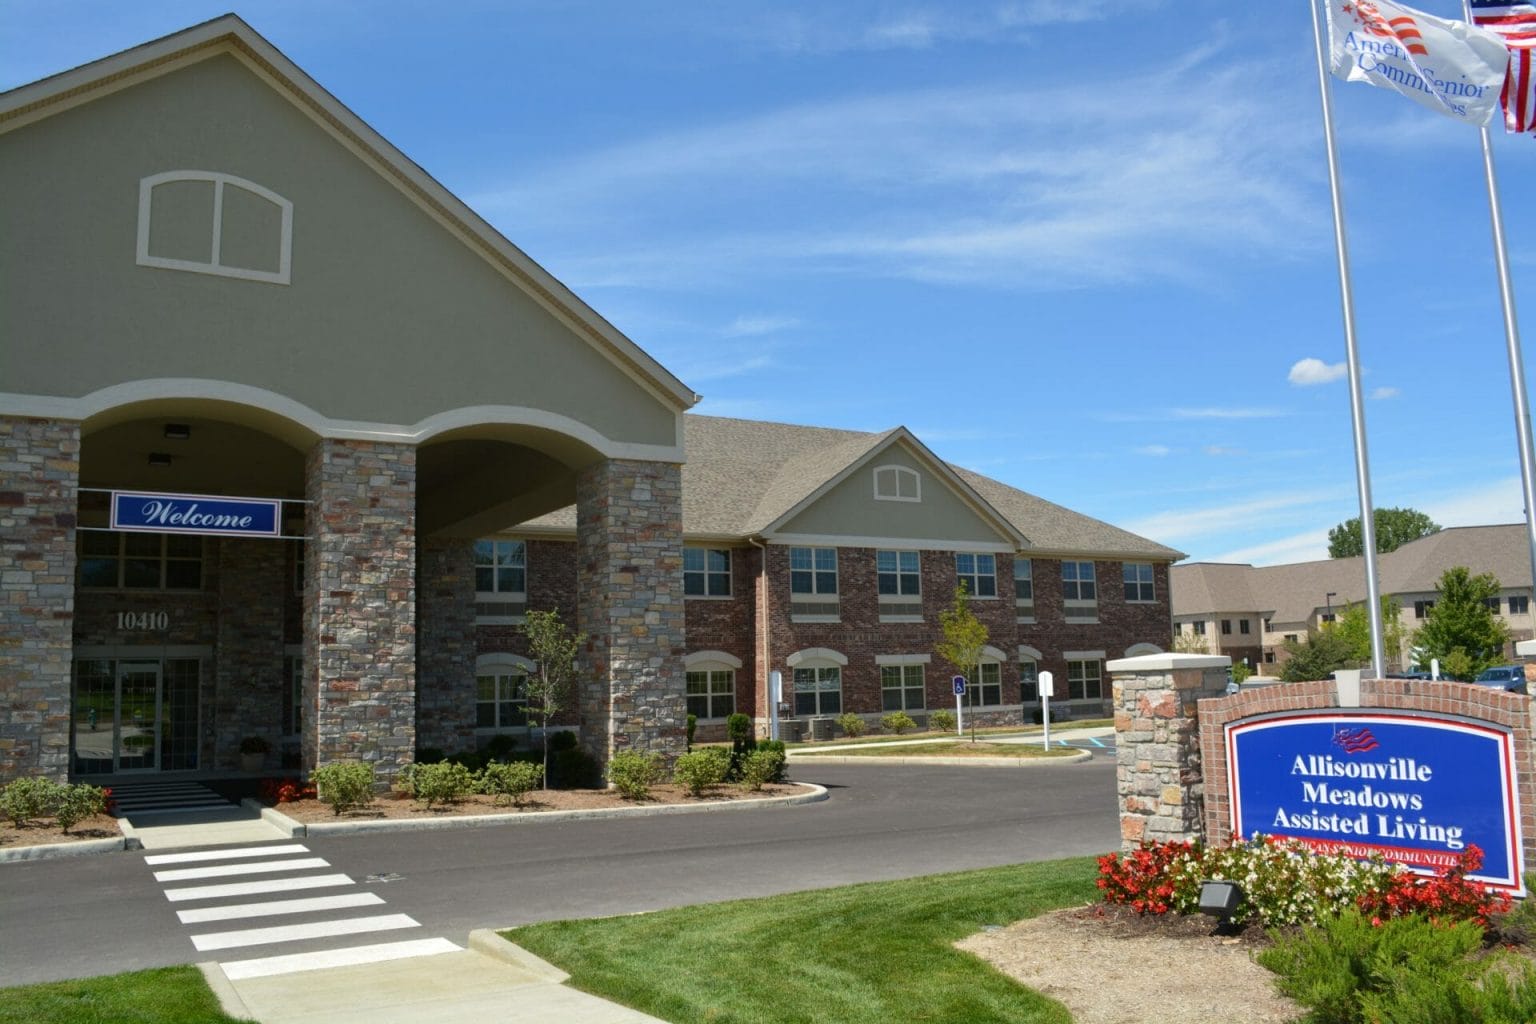 Outside of the main entrance at Allisonville Meadows Assisted Living building.